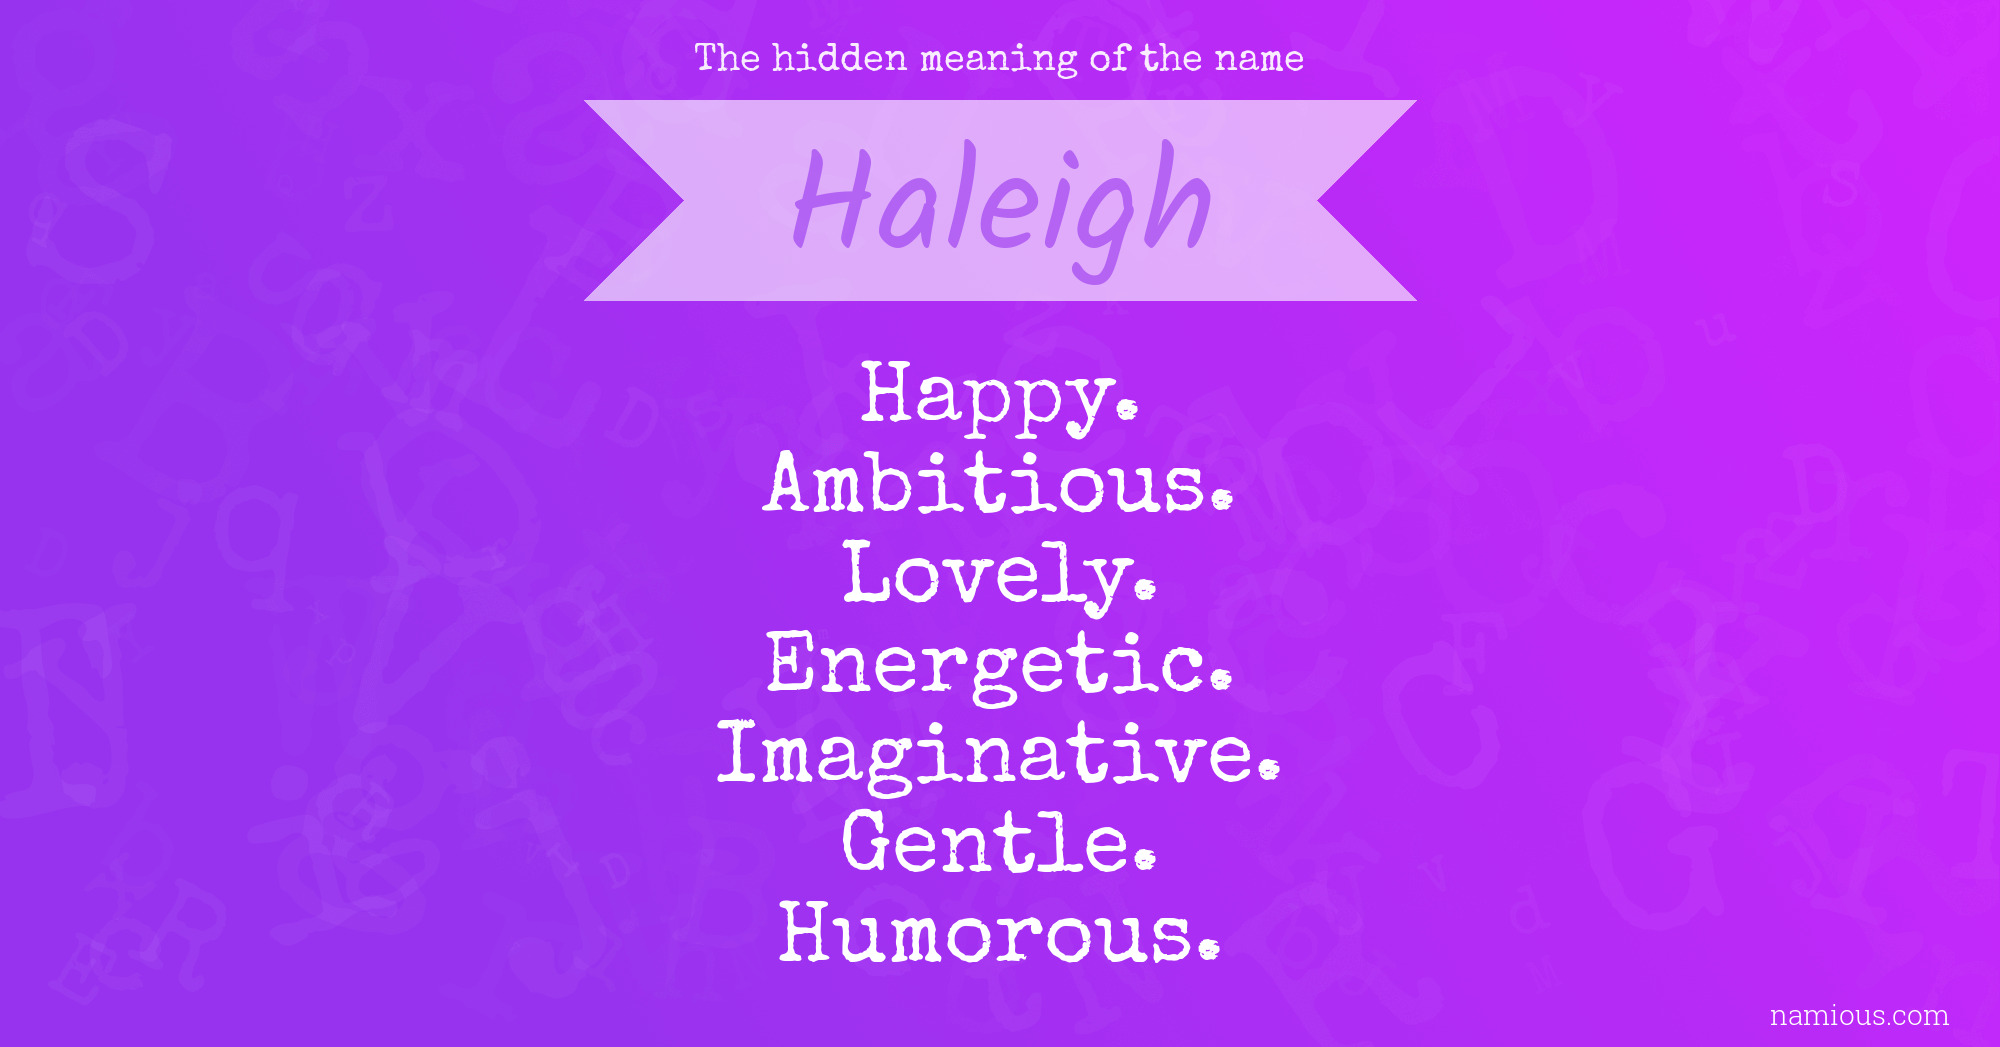 The hidden meaning of the name Haleigh